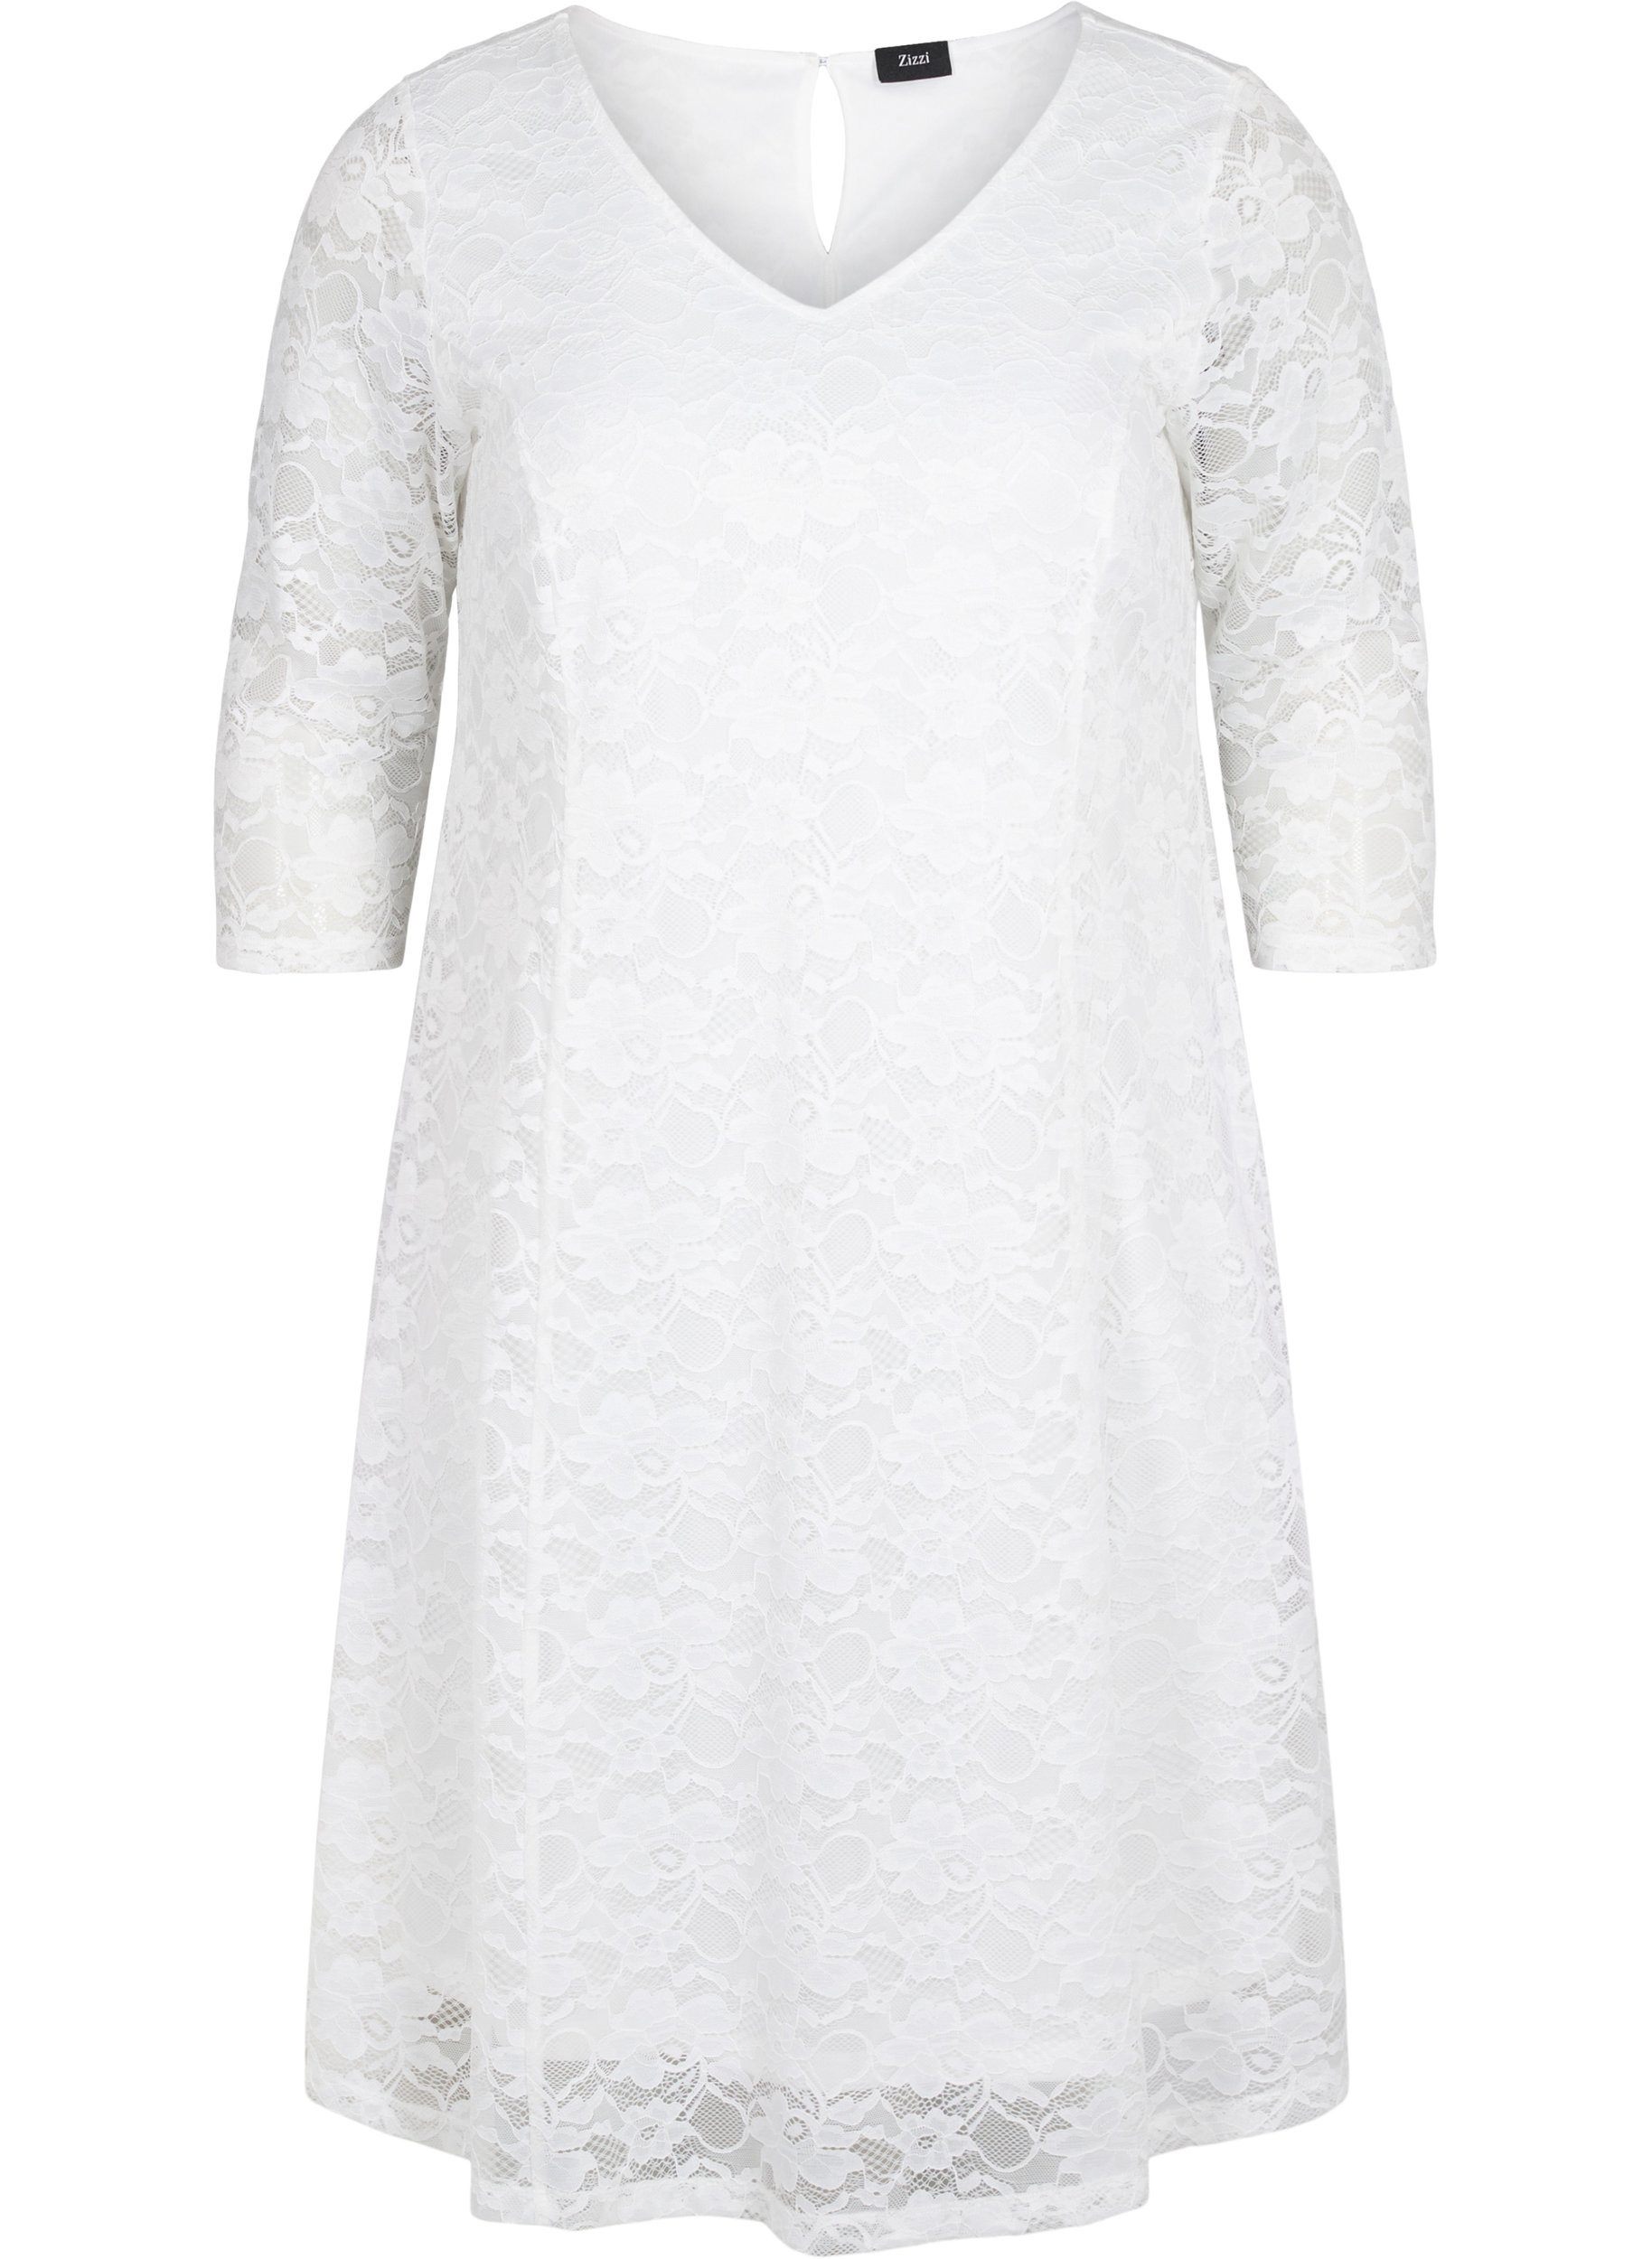 Lace dress with 3/4 sleeves, White